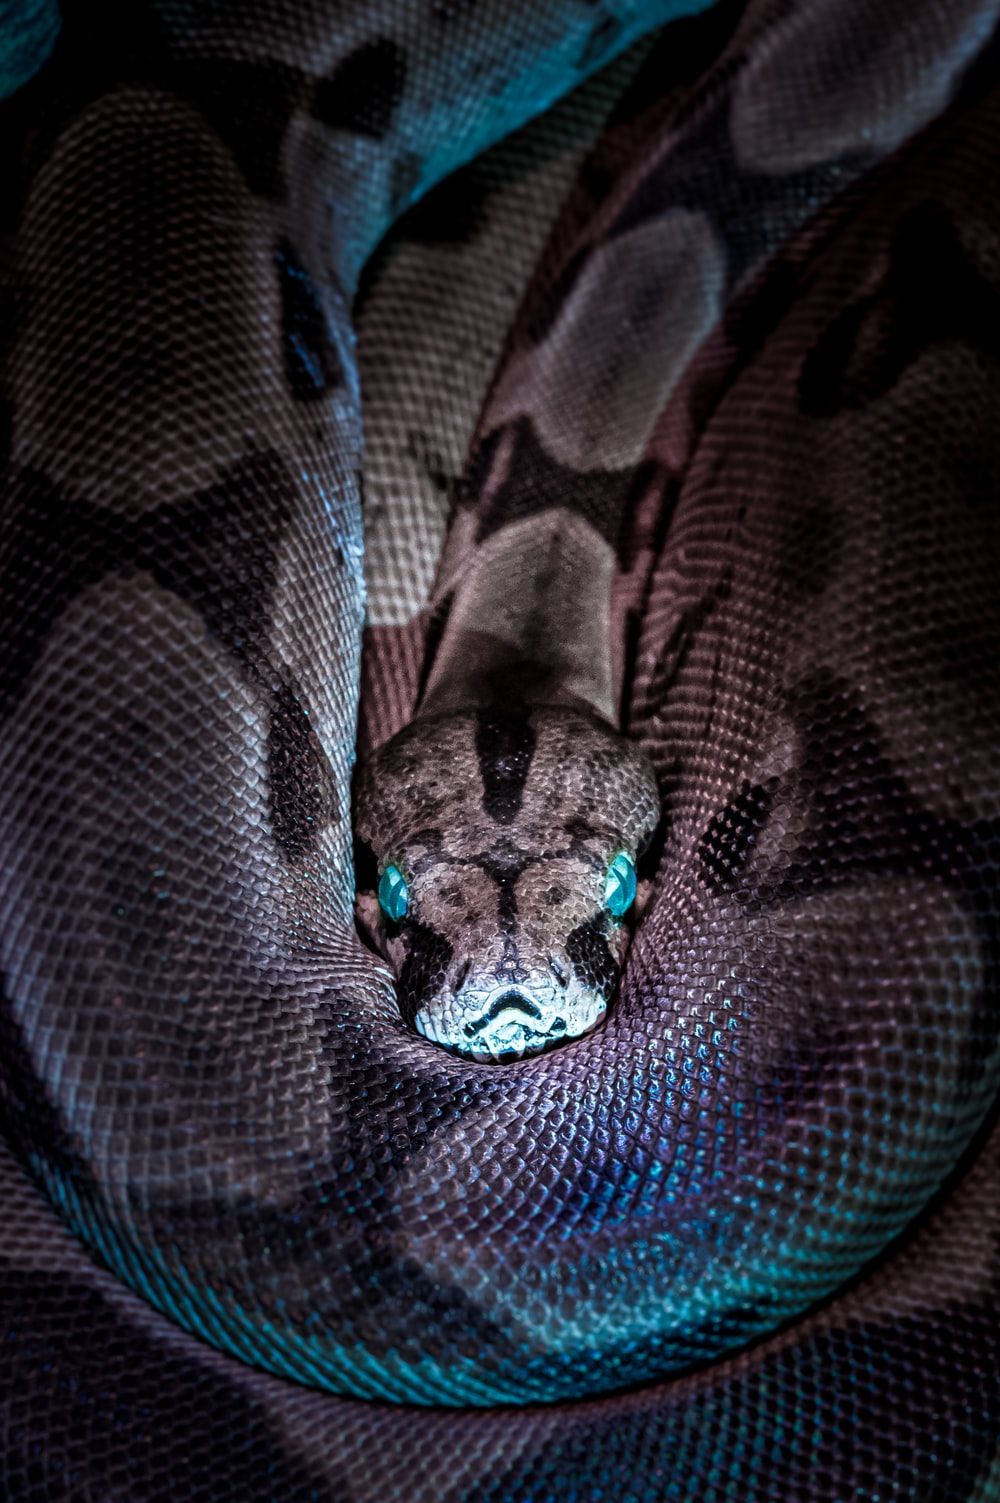 Snake Picture. Download Free Image .com